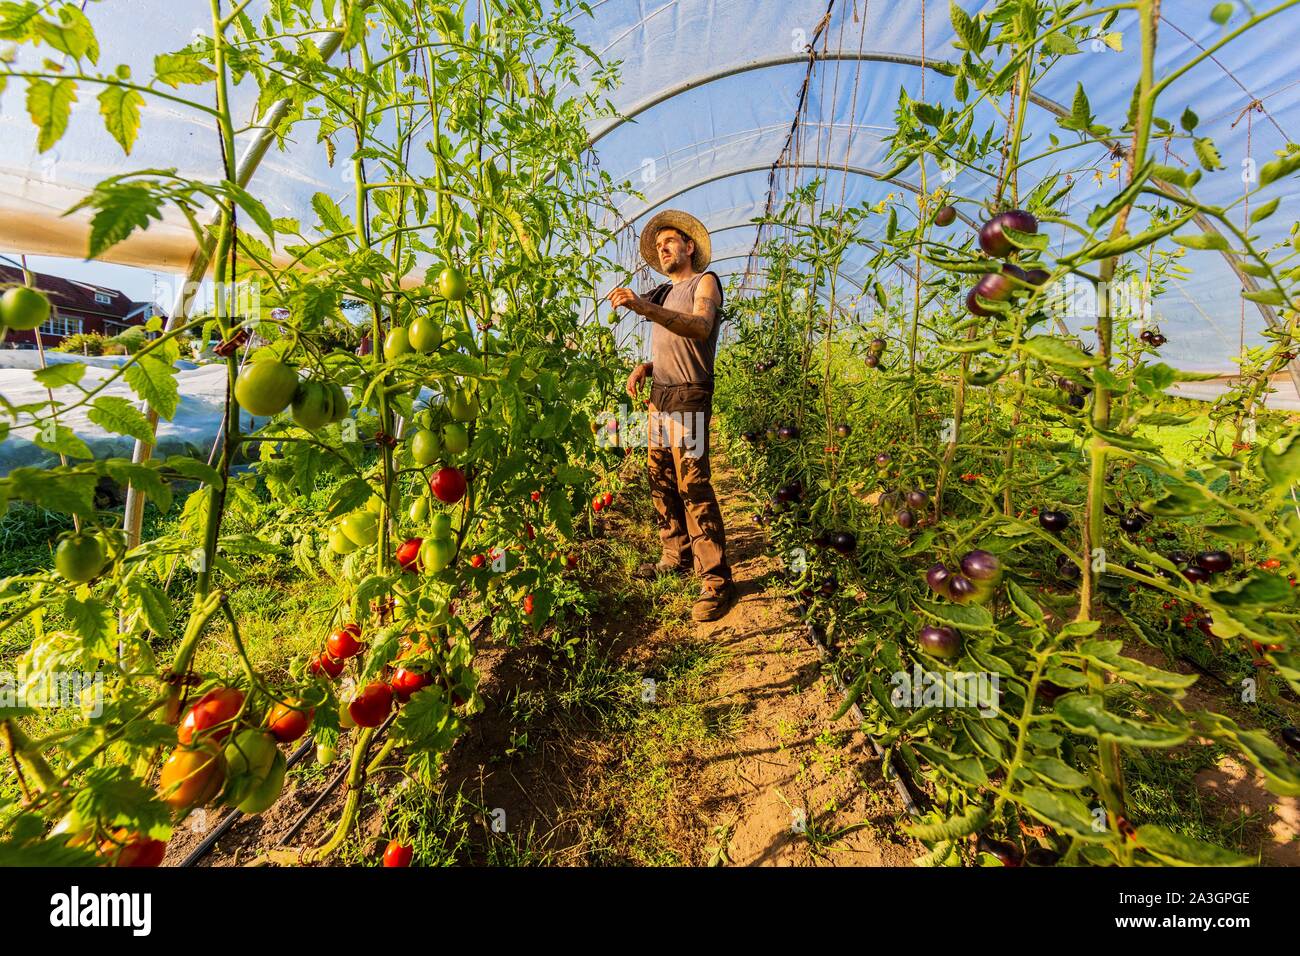 Sweden, County of Vastra Gotaland, Hokerum, Ulricehamn hamlet, Rochat family report, Pierre inspecting his tomato plantations in tunnel Stock Photo